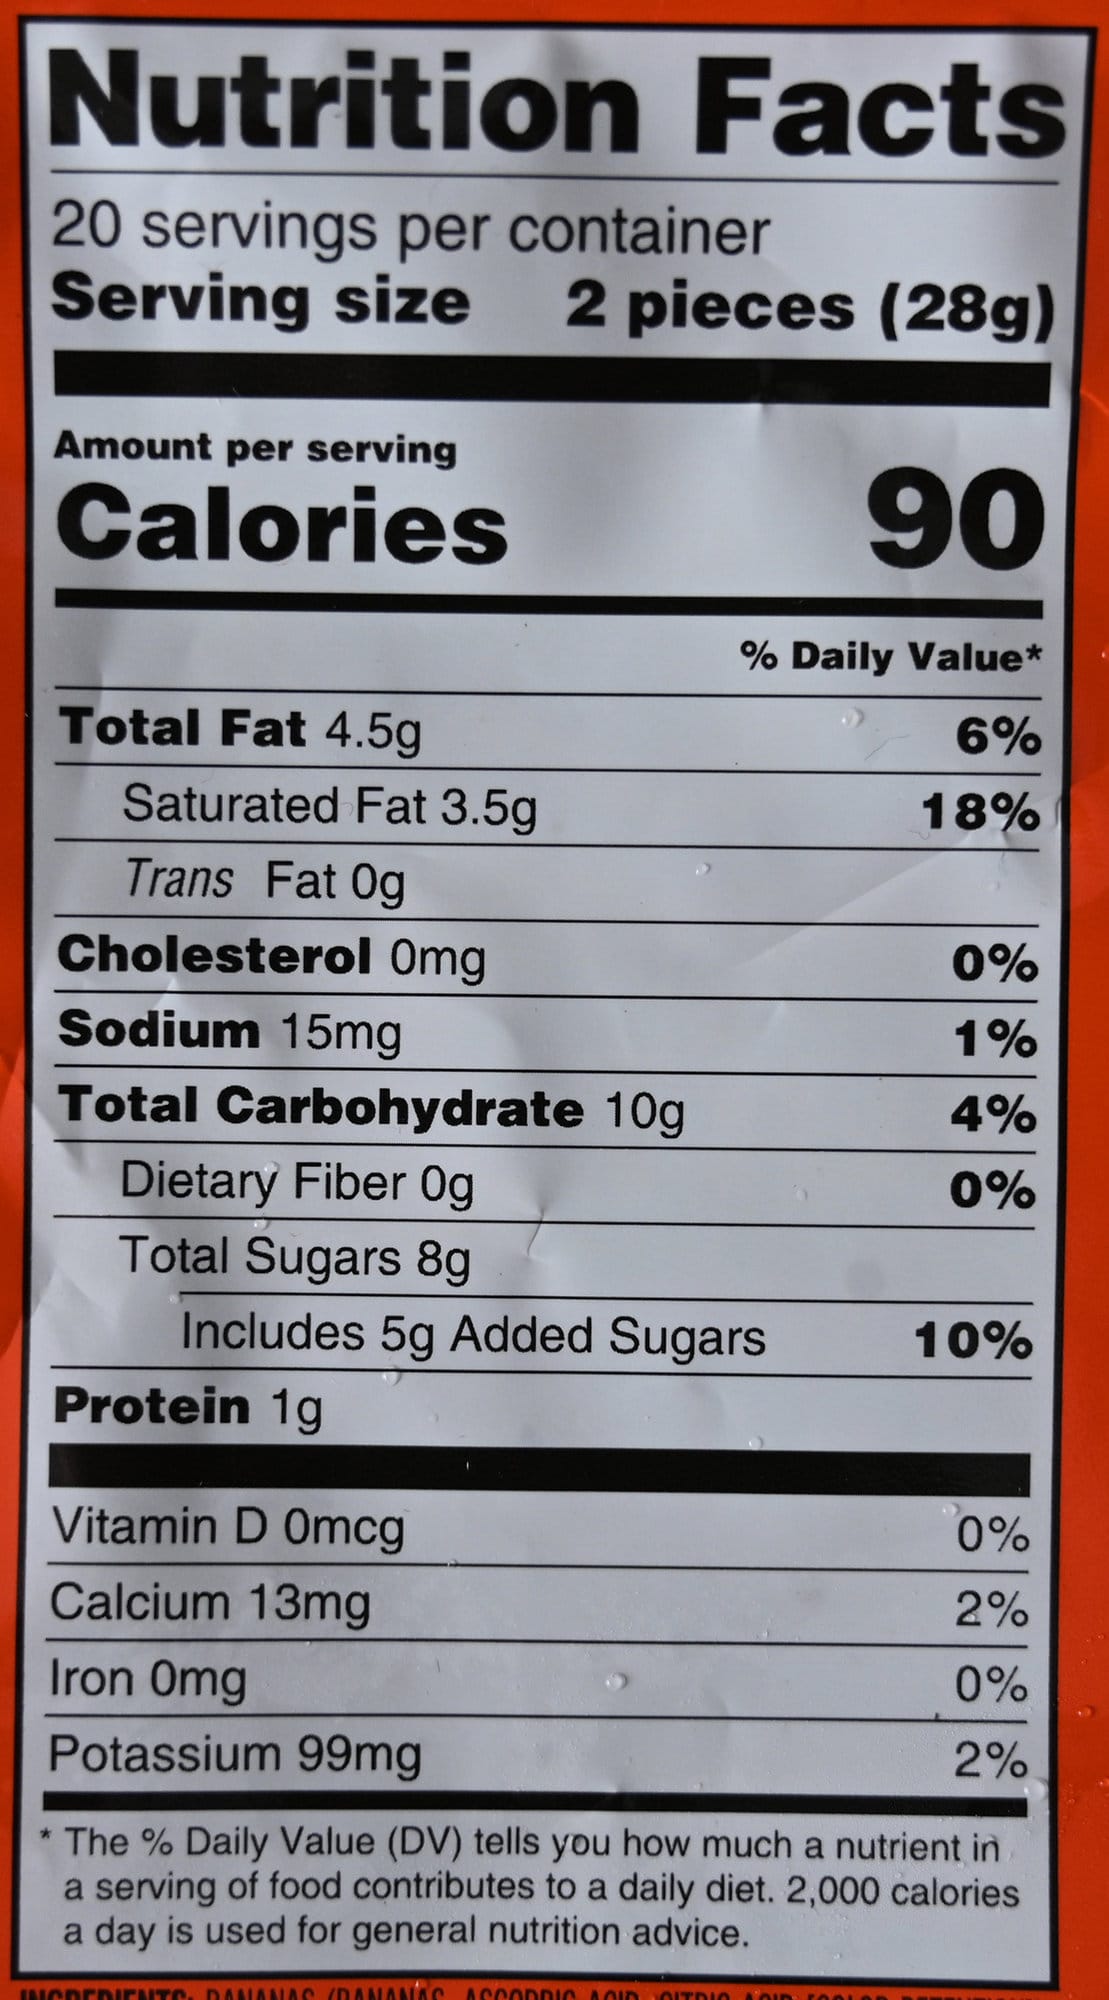 Image of the nutrition facts from the back of the bag.